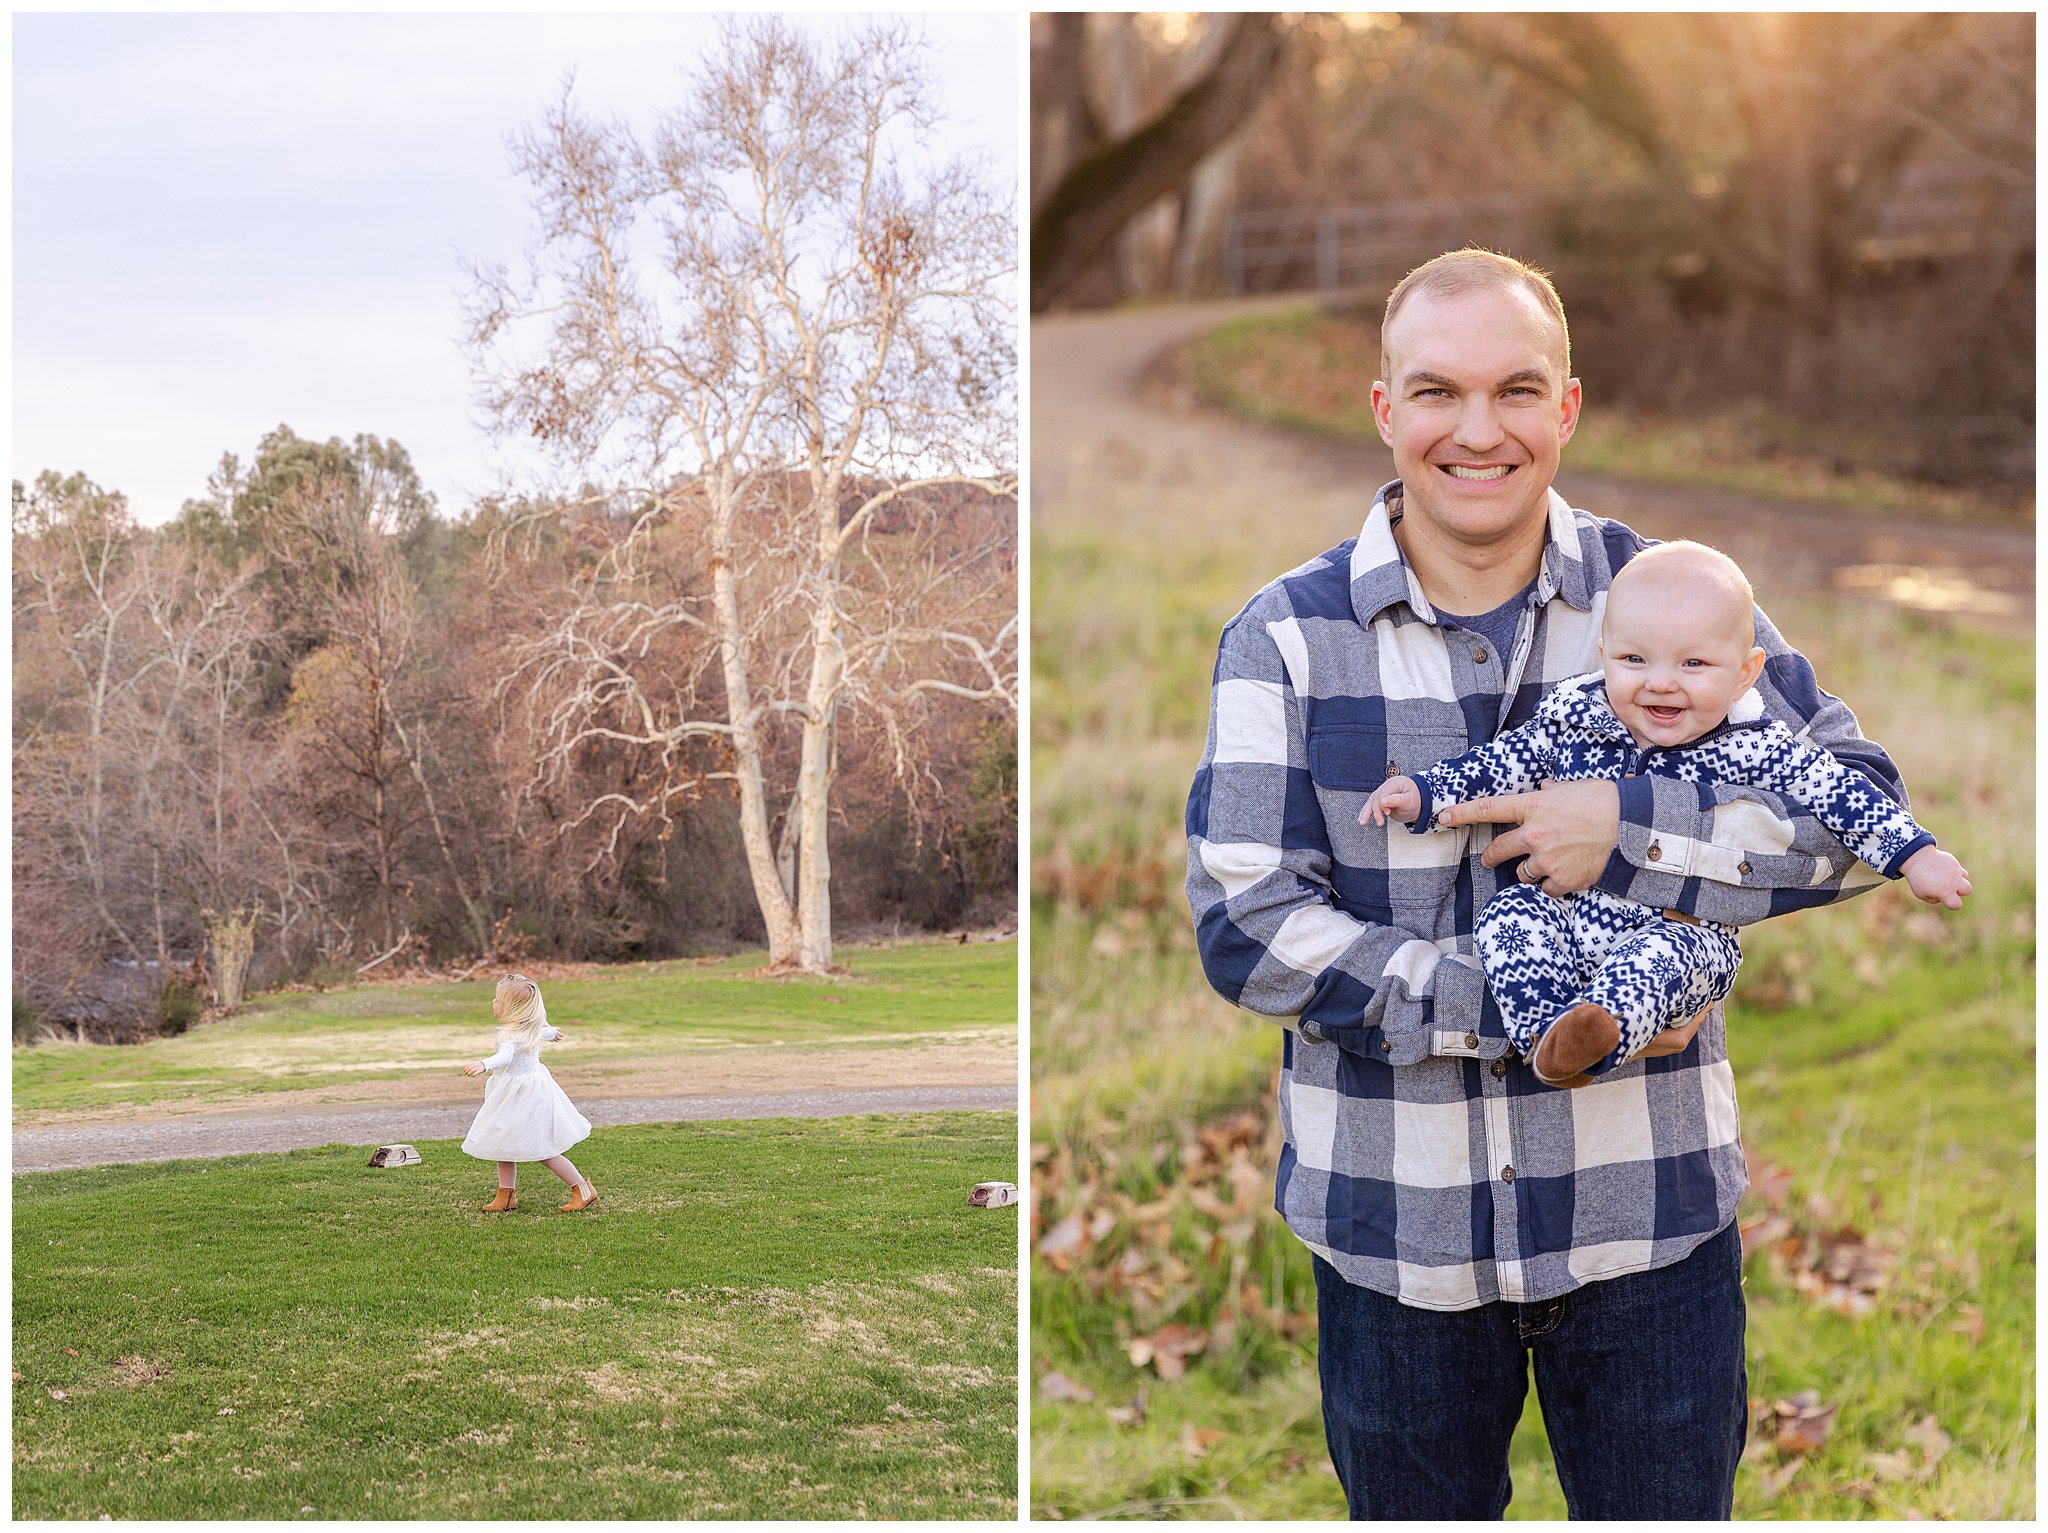 Bidwell Park Golf Course Chico CA Family Session January Winter Blue White,